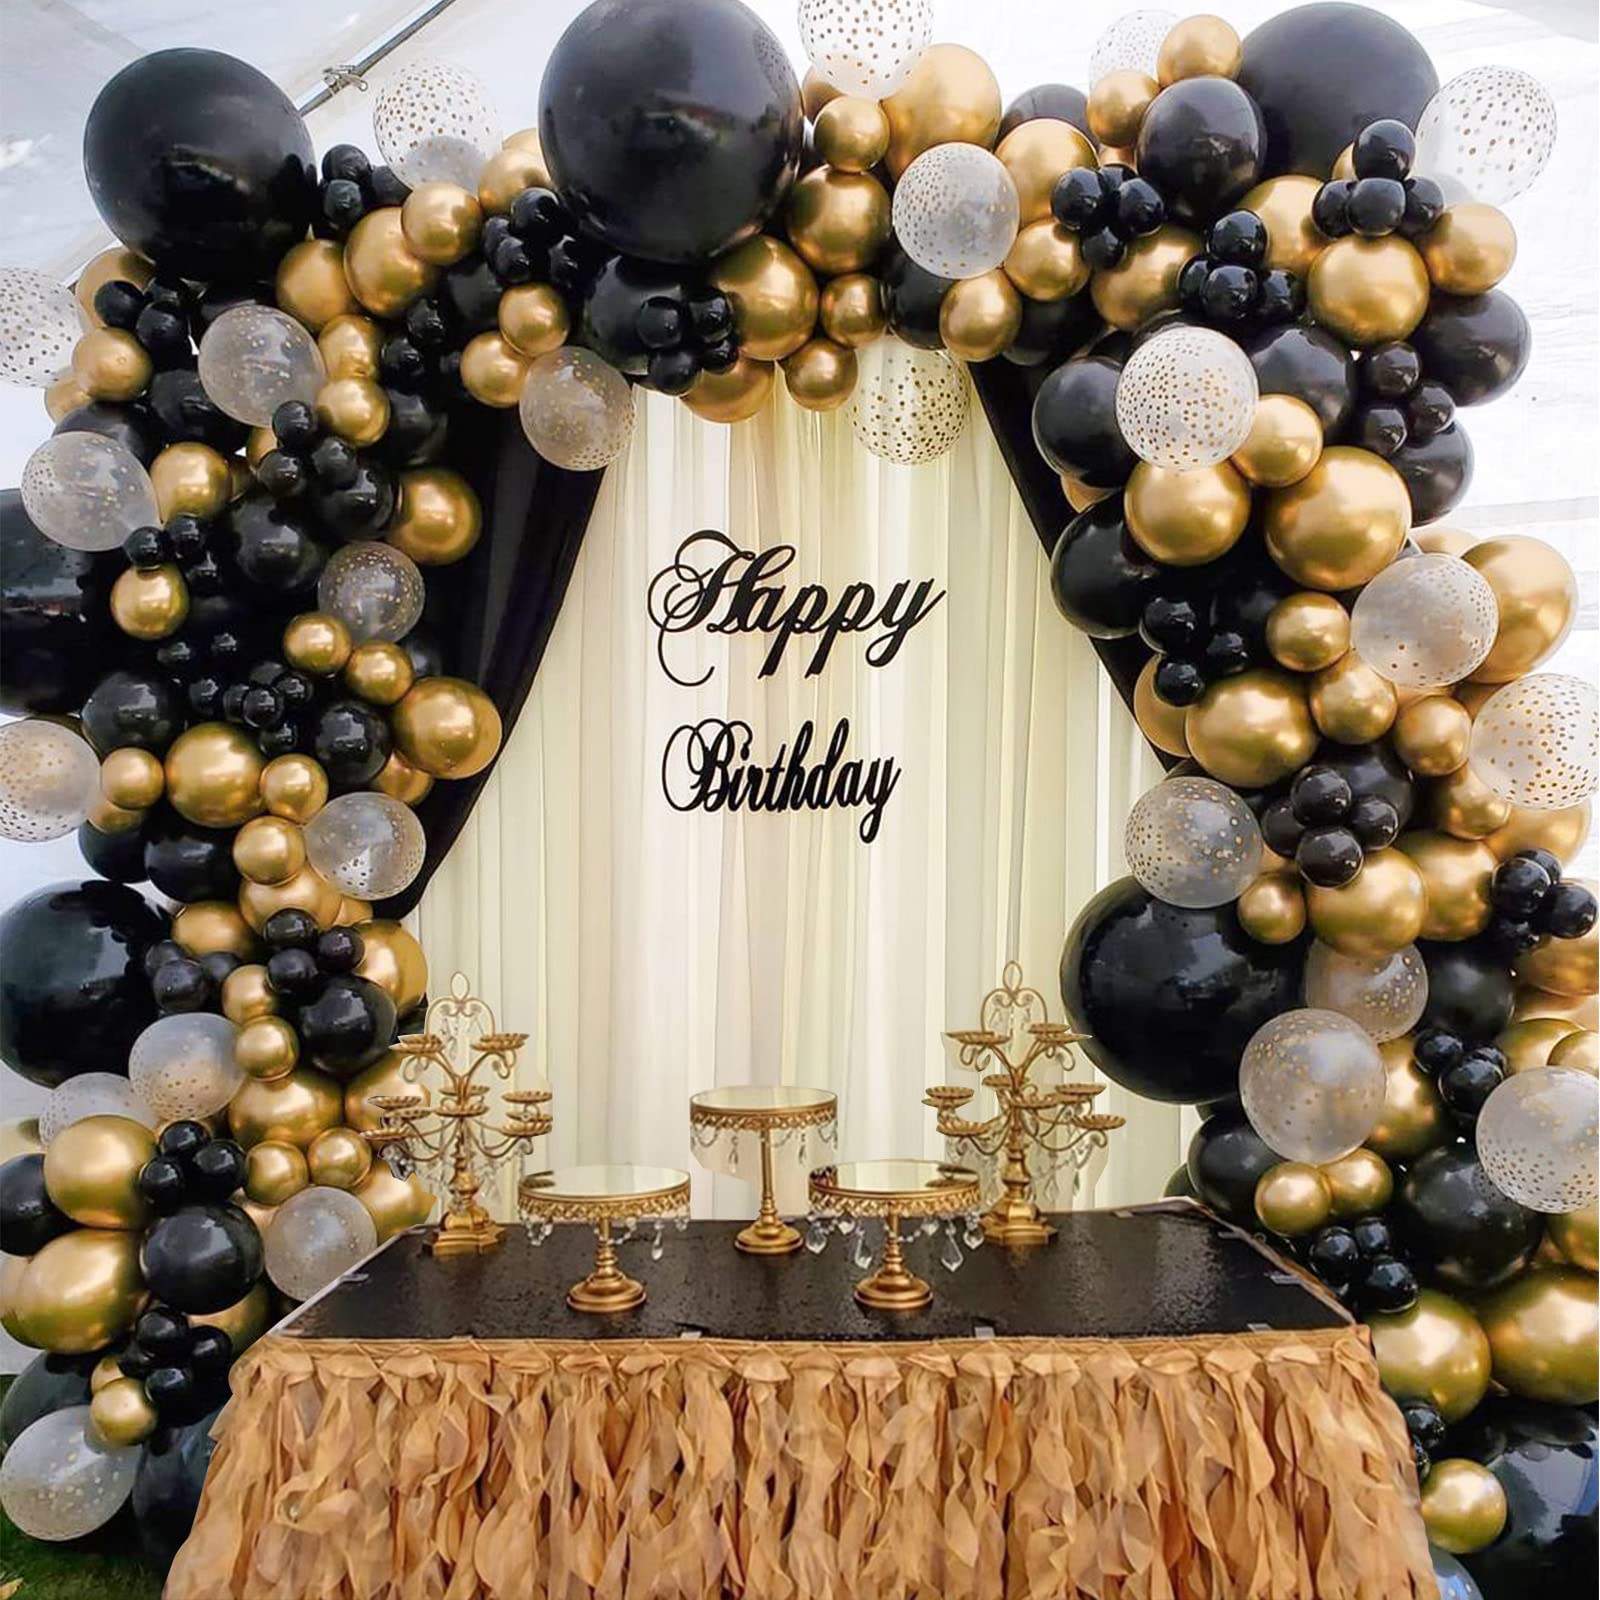 RUBFAC 129pcs Metallic Gold and Black Balloons Latex Balloons Different Sizes 18 12 10 5 Inch Party Balloon Kit for Birthday Party Graduation Baby Shower Wedding Holiday Decoration